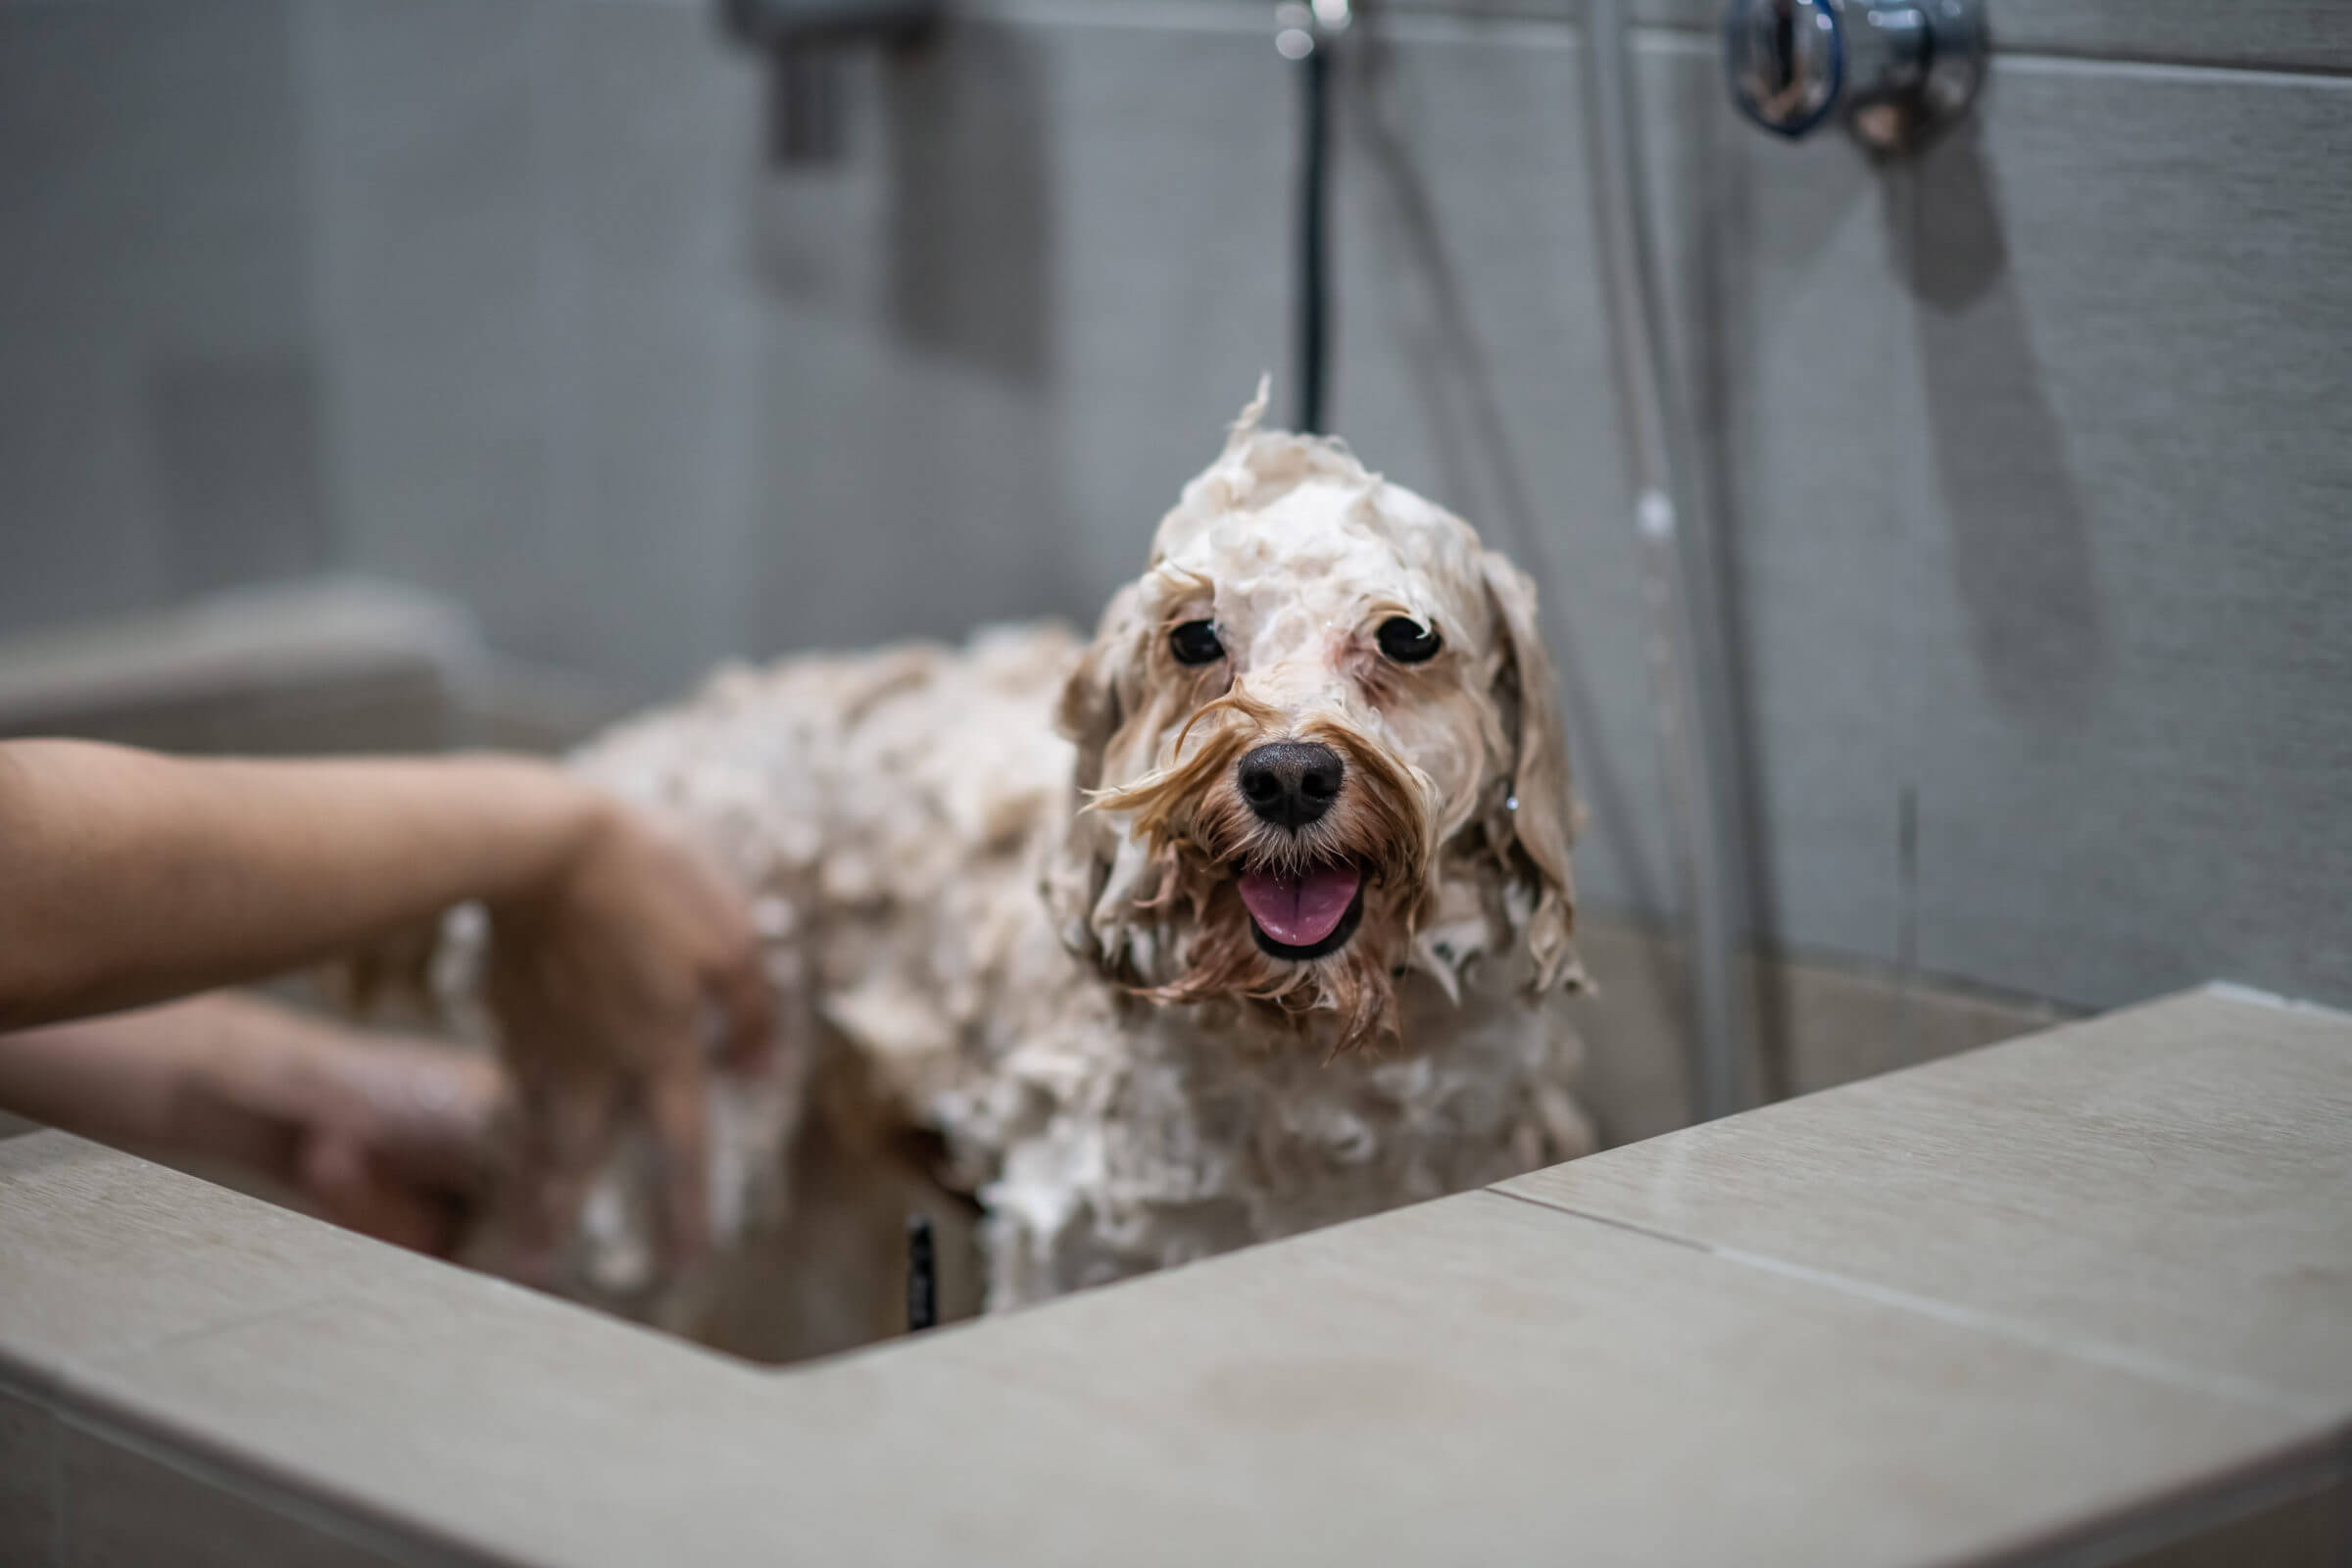 Ceramic tile for dog showers and pet washing stations